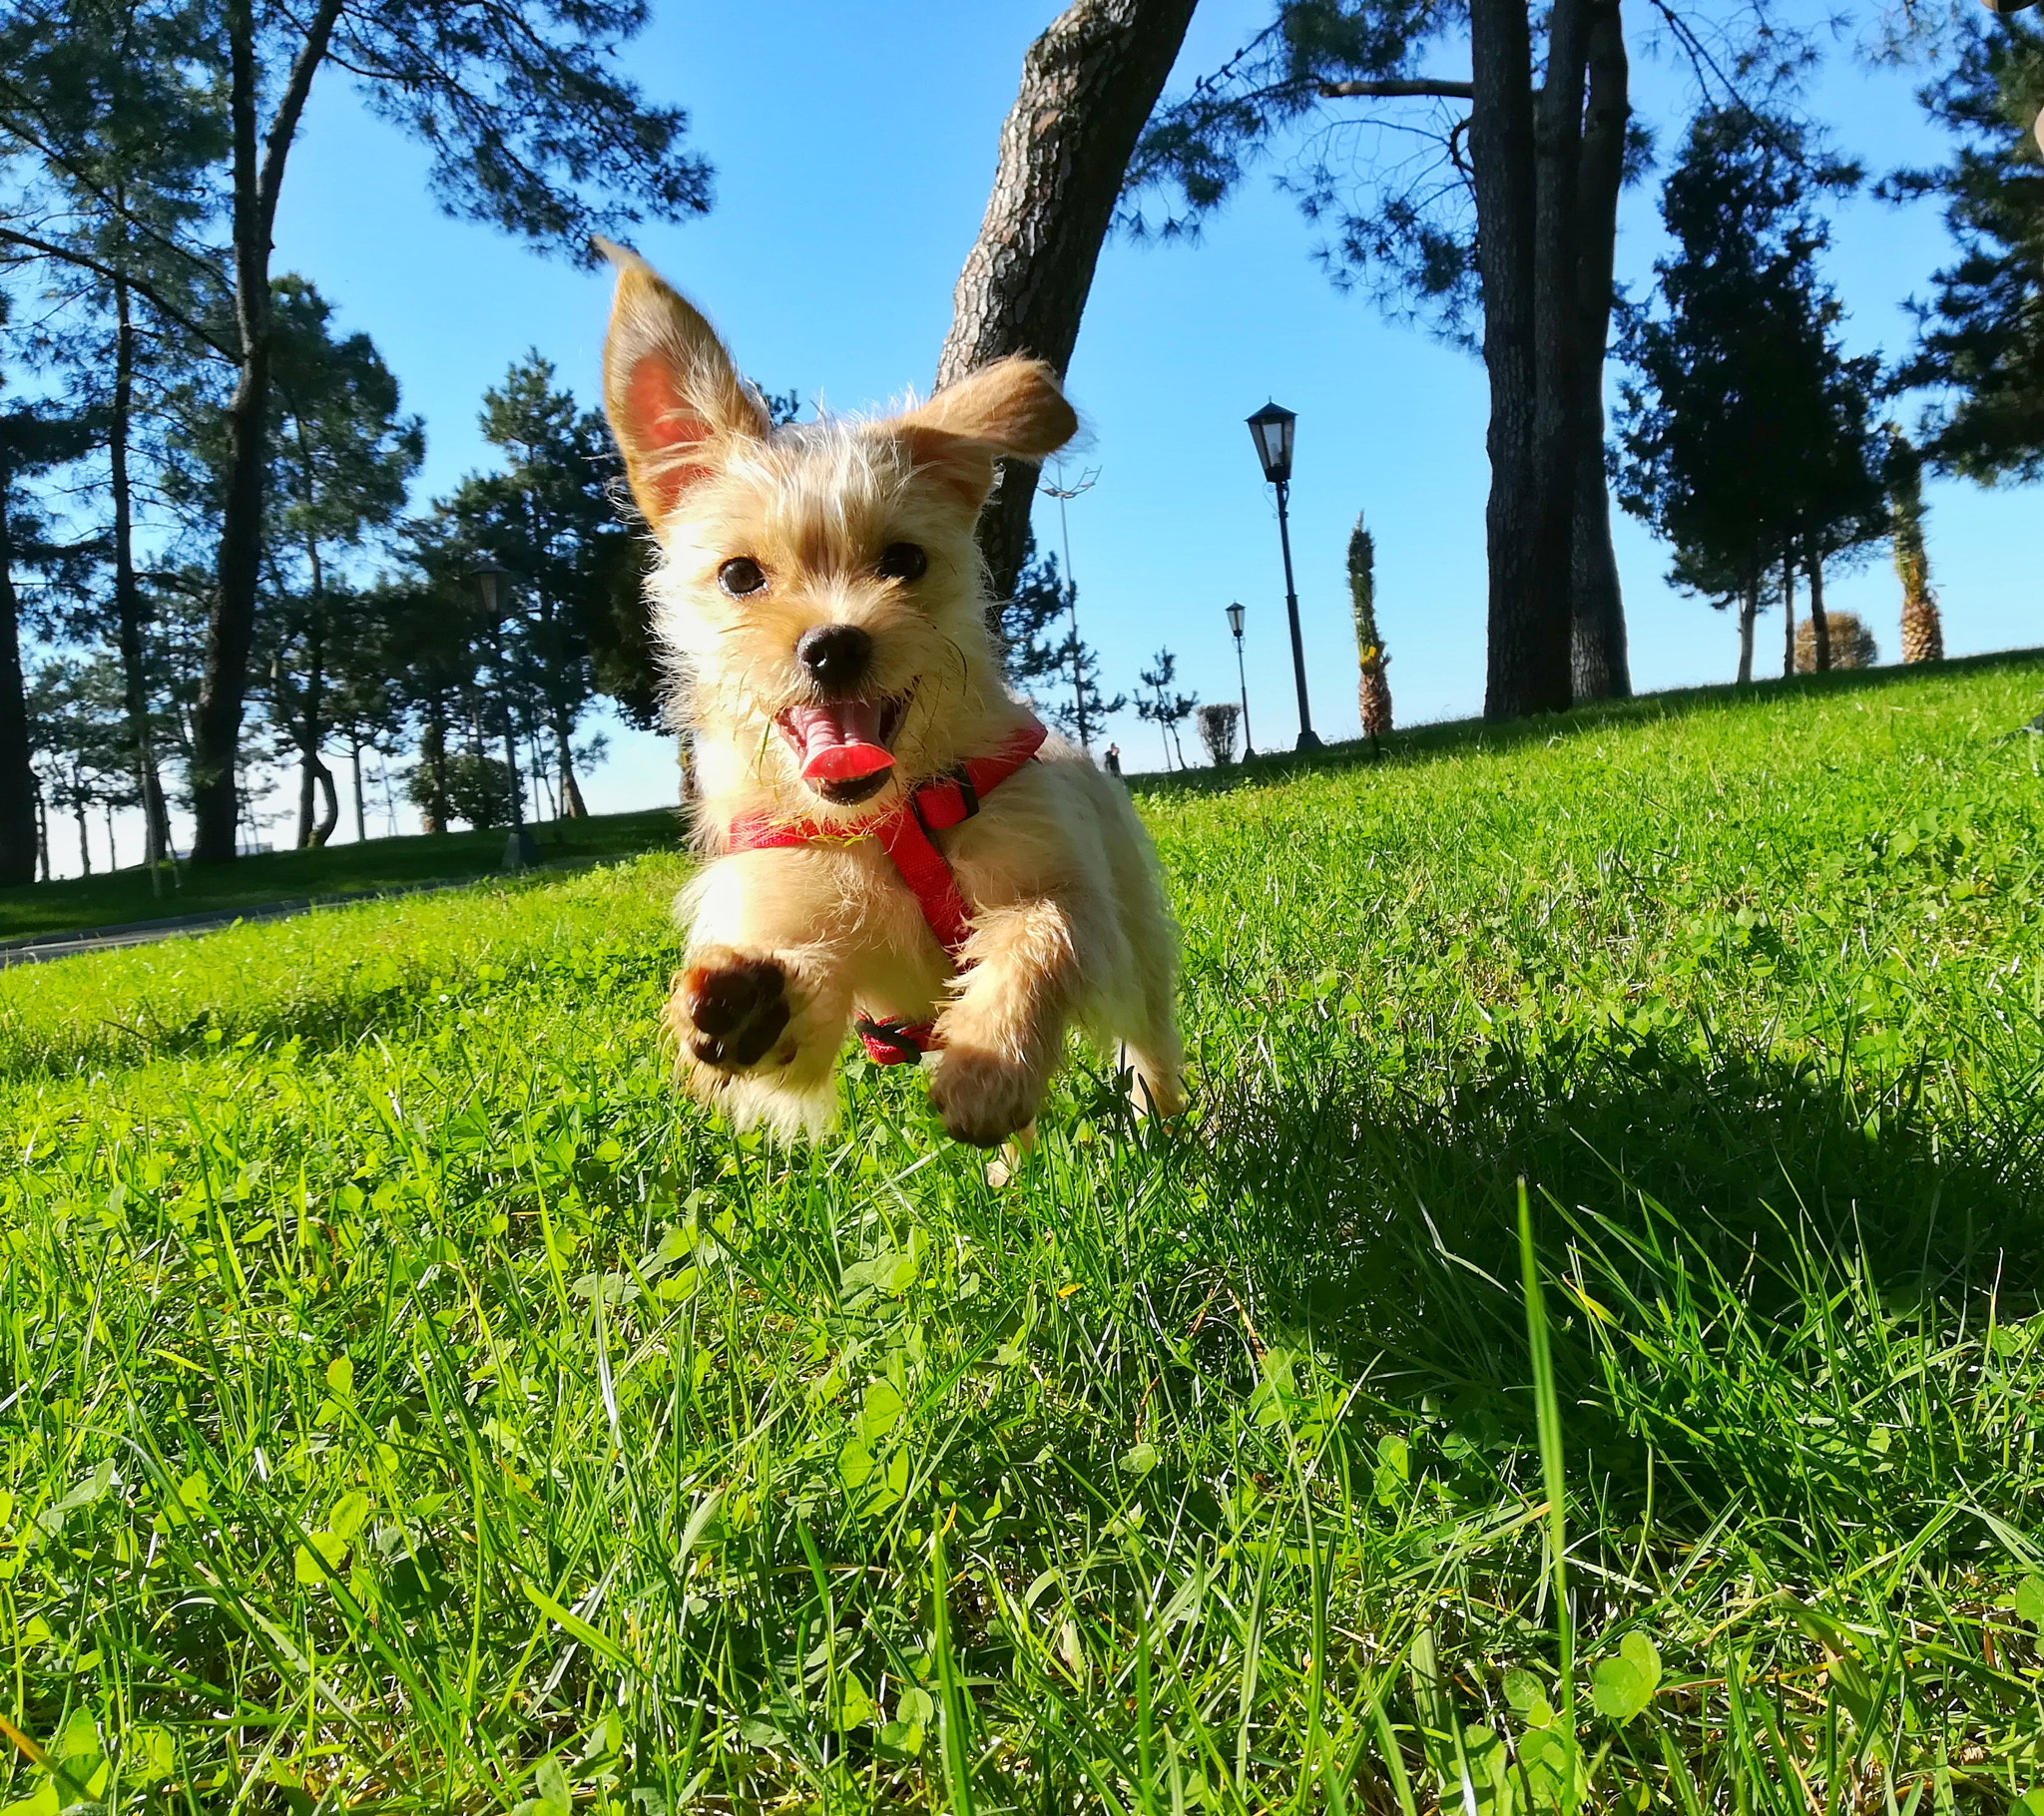 HUAWEI P8 lite 2017 sample photo. Cute puppy photography